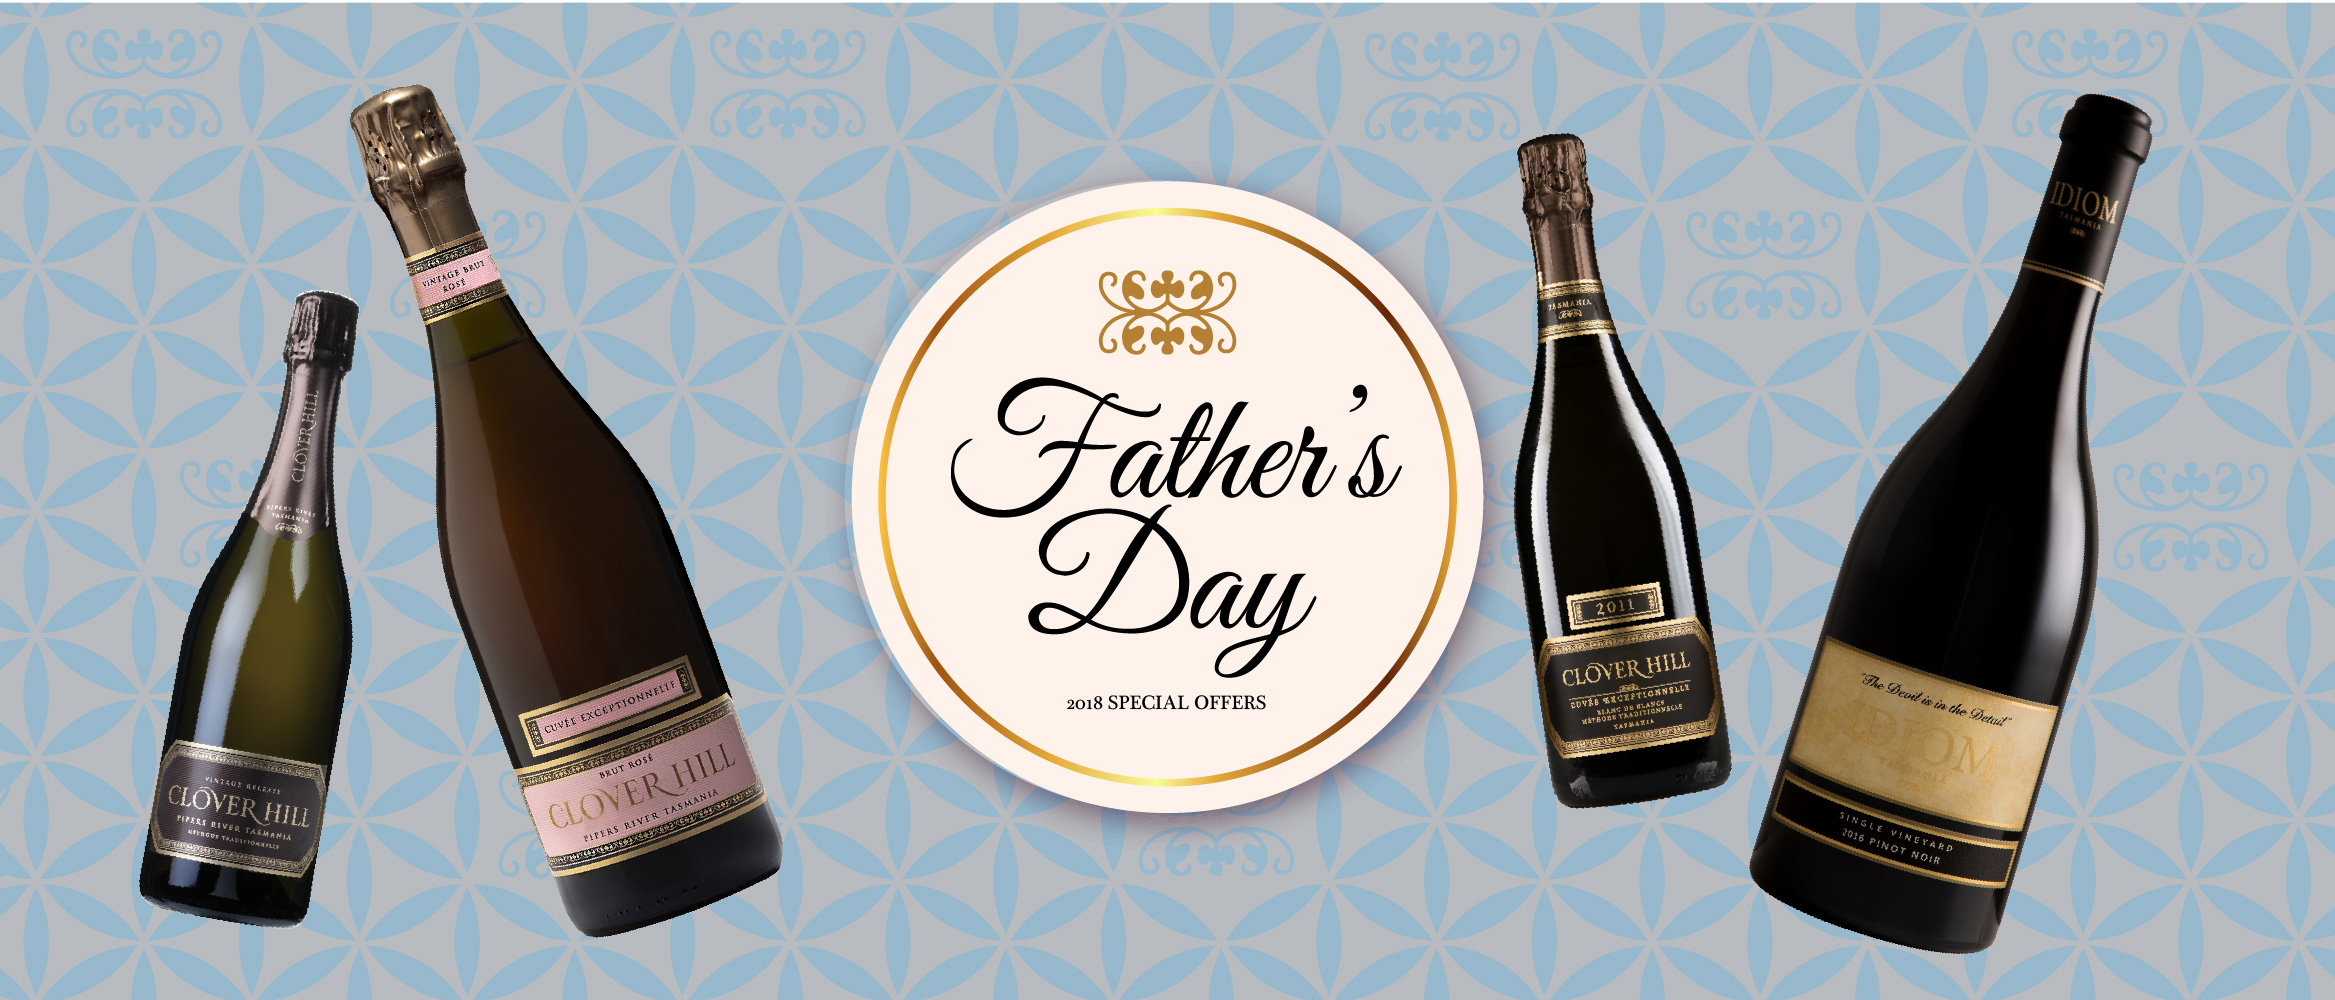 You can’t go wrong choosing award-winning, cool-climate Tasmanian wines for your Father's Day Wine. Free Australian Shipping Available.